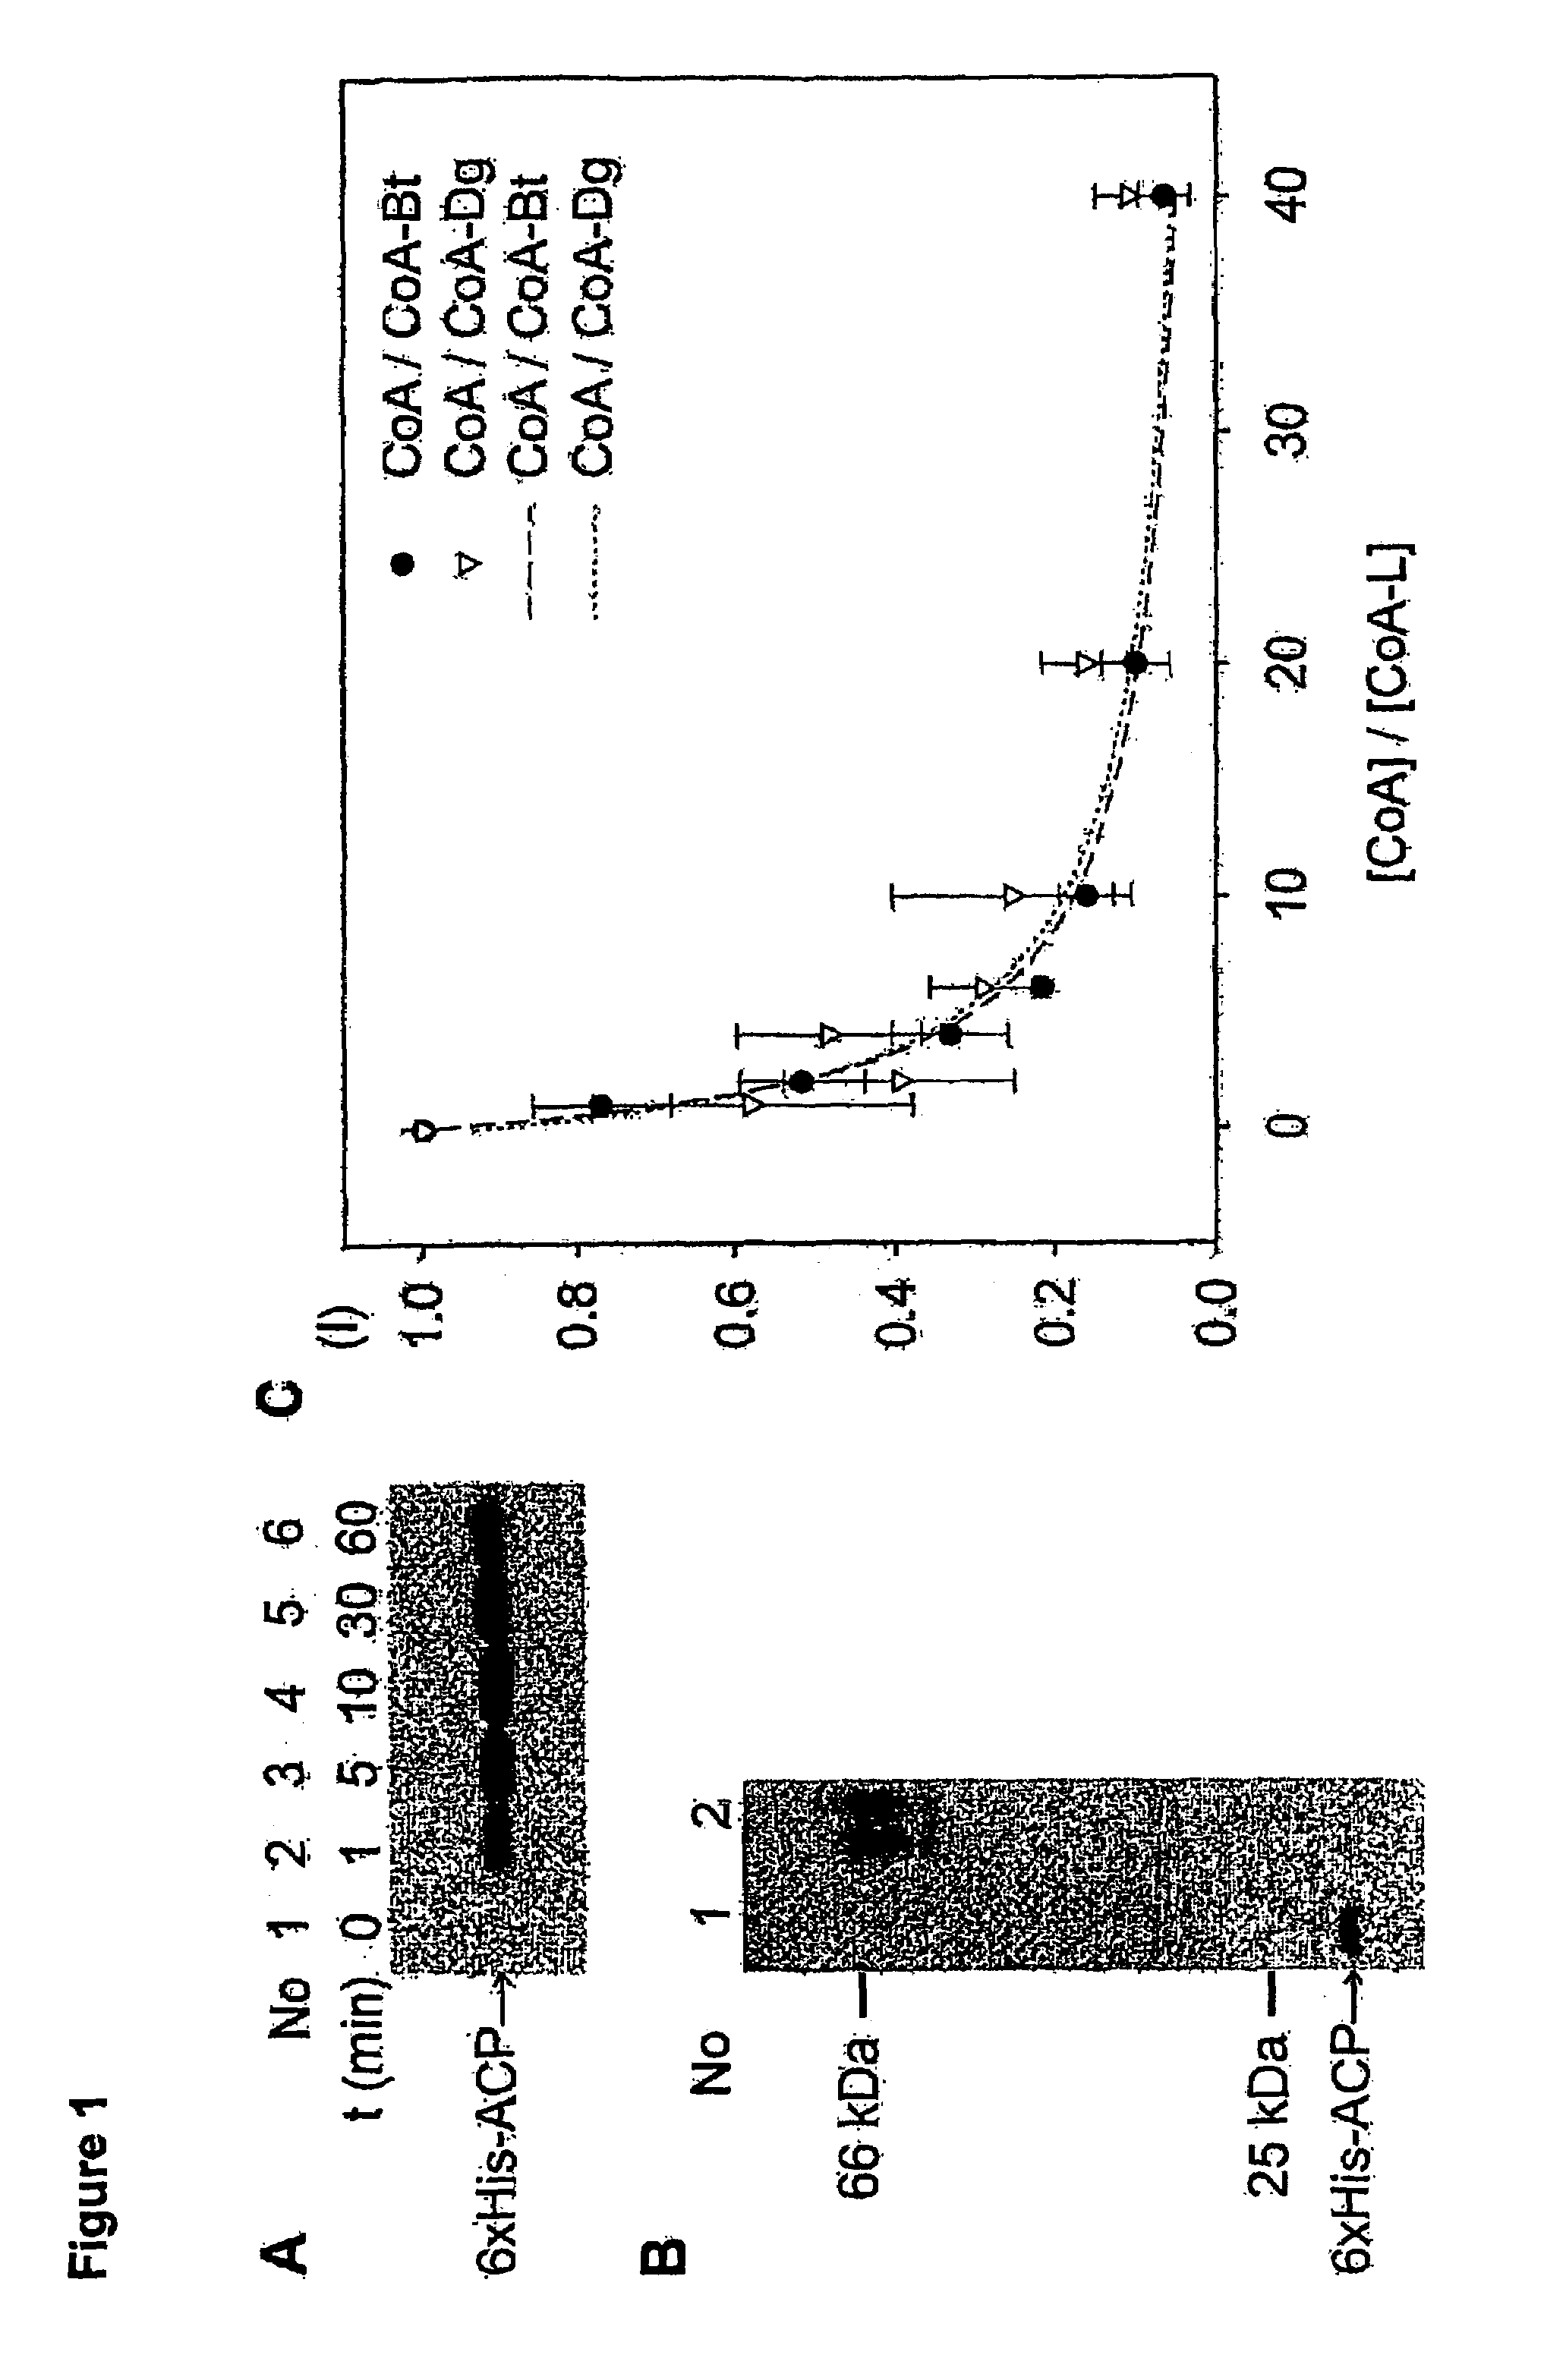 Methods for protein labeling based on acyl carrier protein